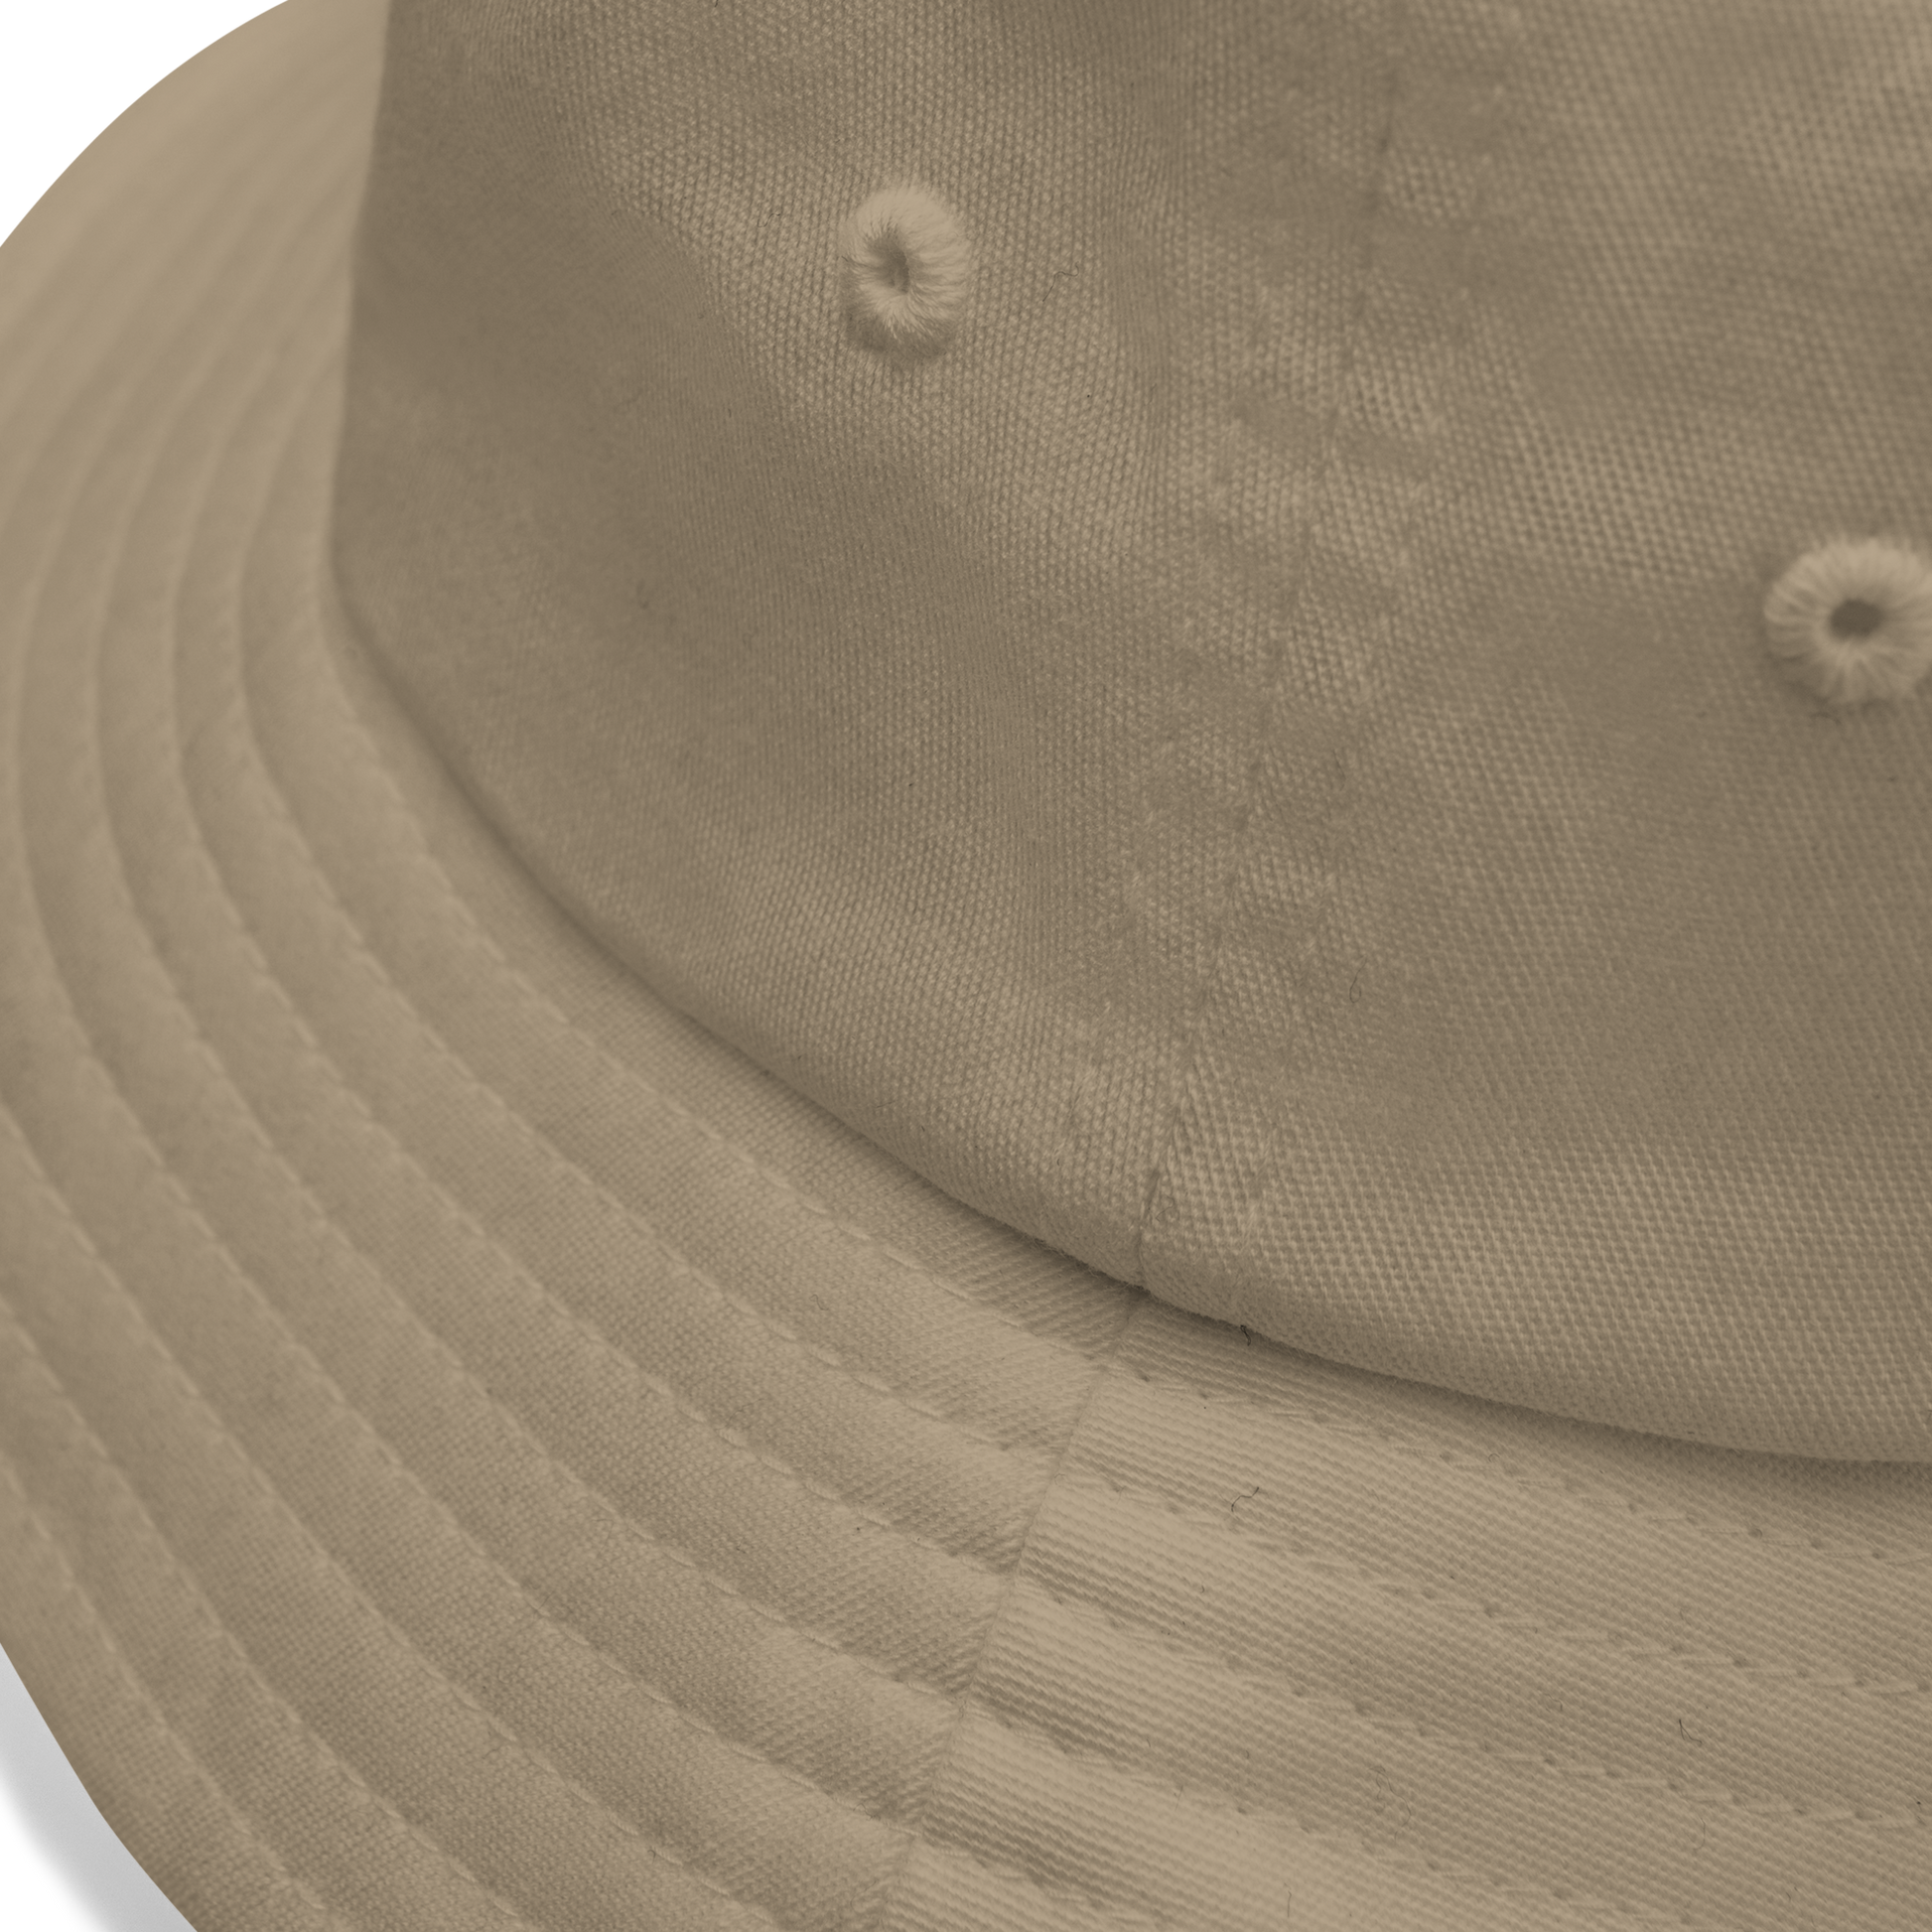 Product details of a Cool Khaki Bucket Hat featuring a striking embroidered Boozy Fox logo on front. Shop Cool Sun Protection Bucket Hats And Wide Brim Hats Online - Boozy Fox